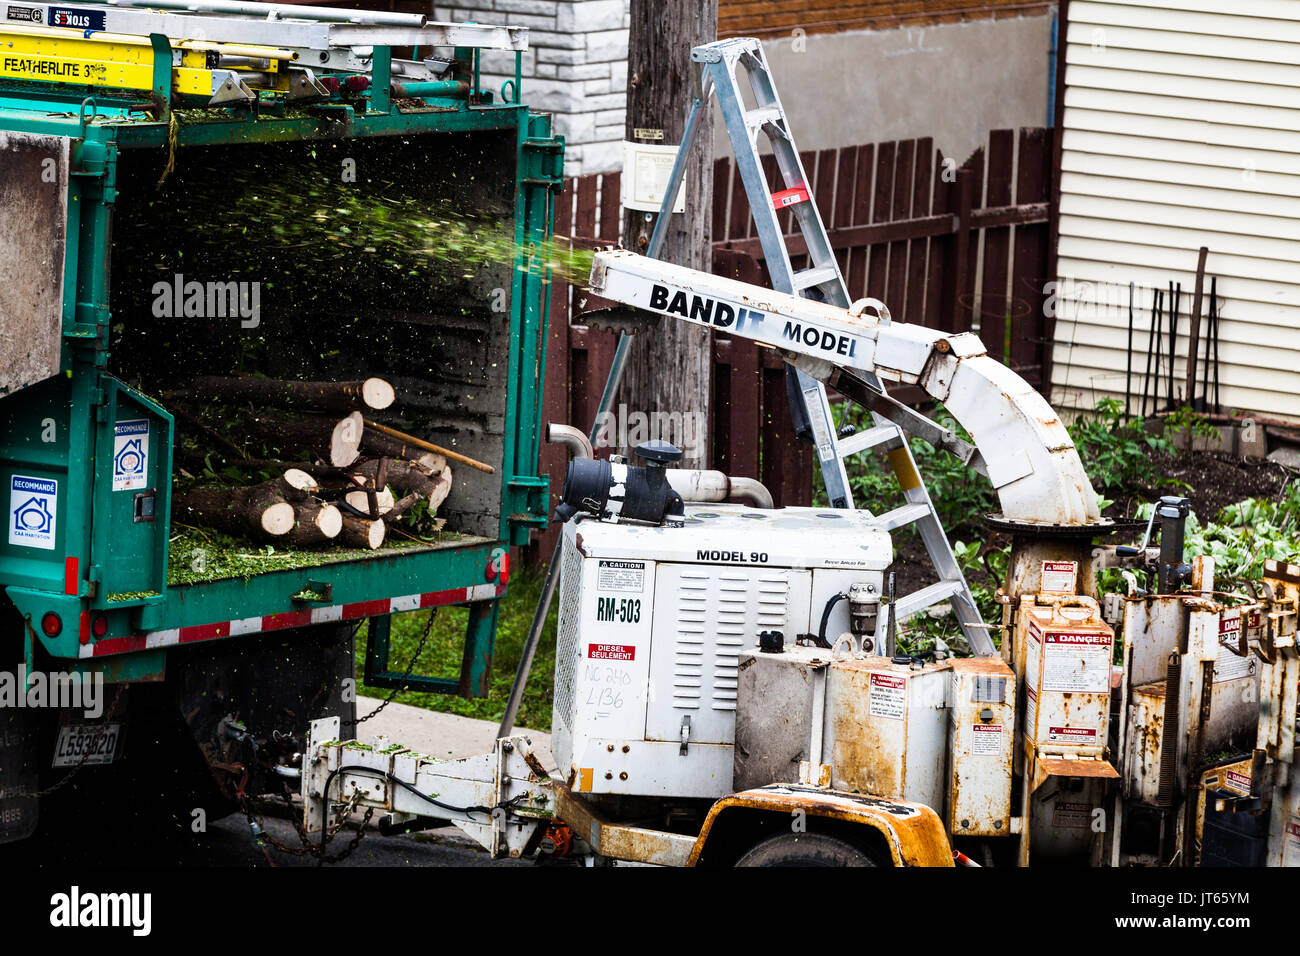 June 11th 2015, Montreal CANADA. Tree Shredder Machine in action and workers pushing Branches into it after cutting the Tree. Stock Photo